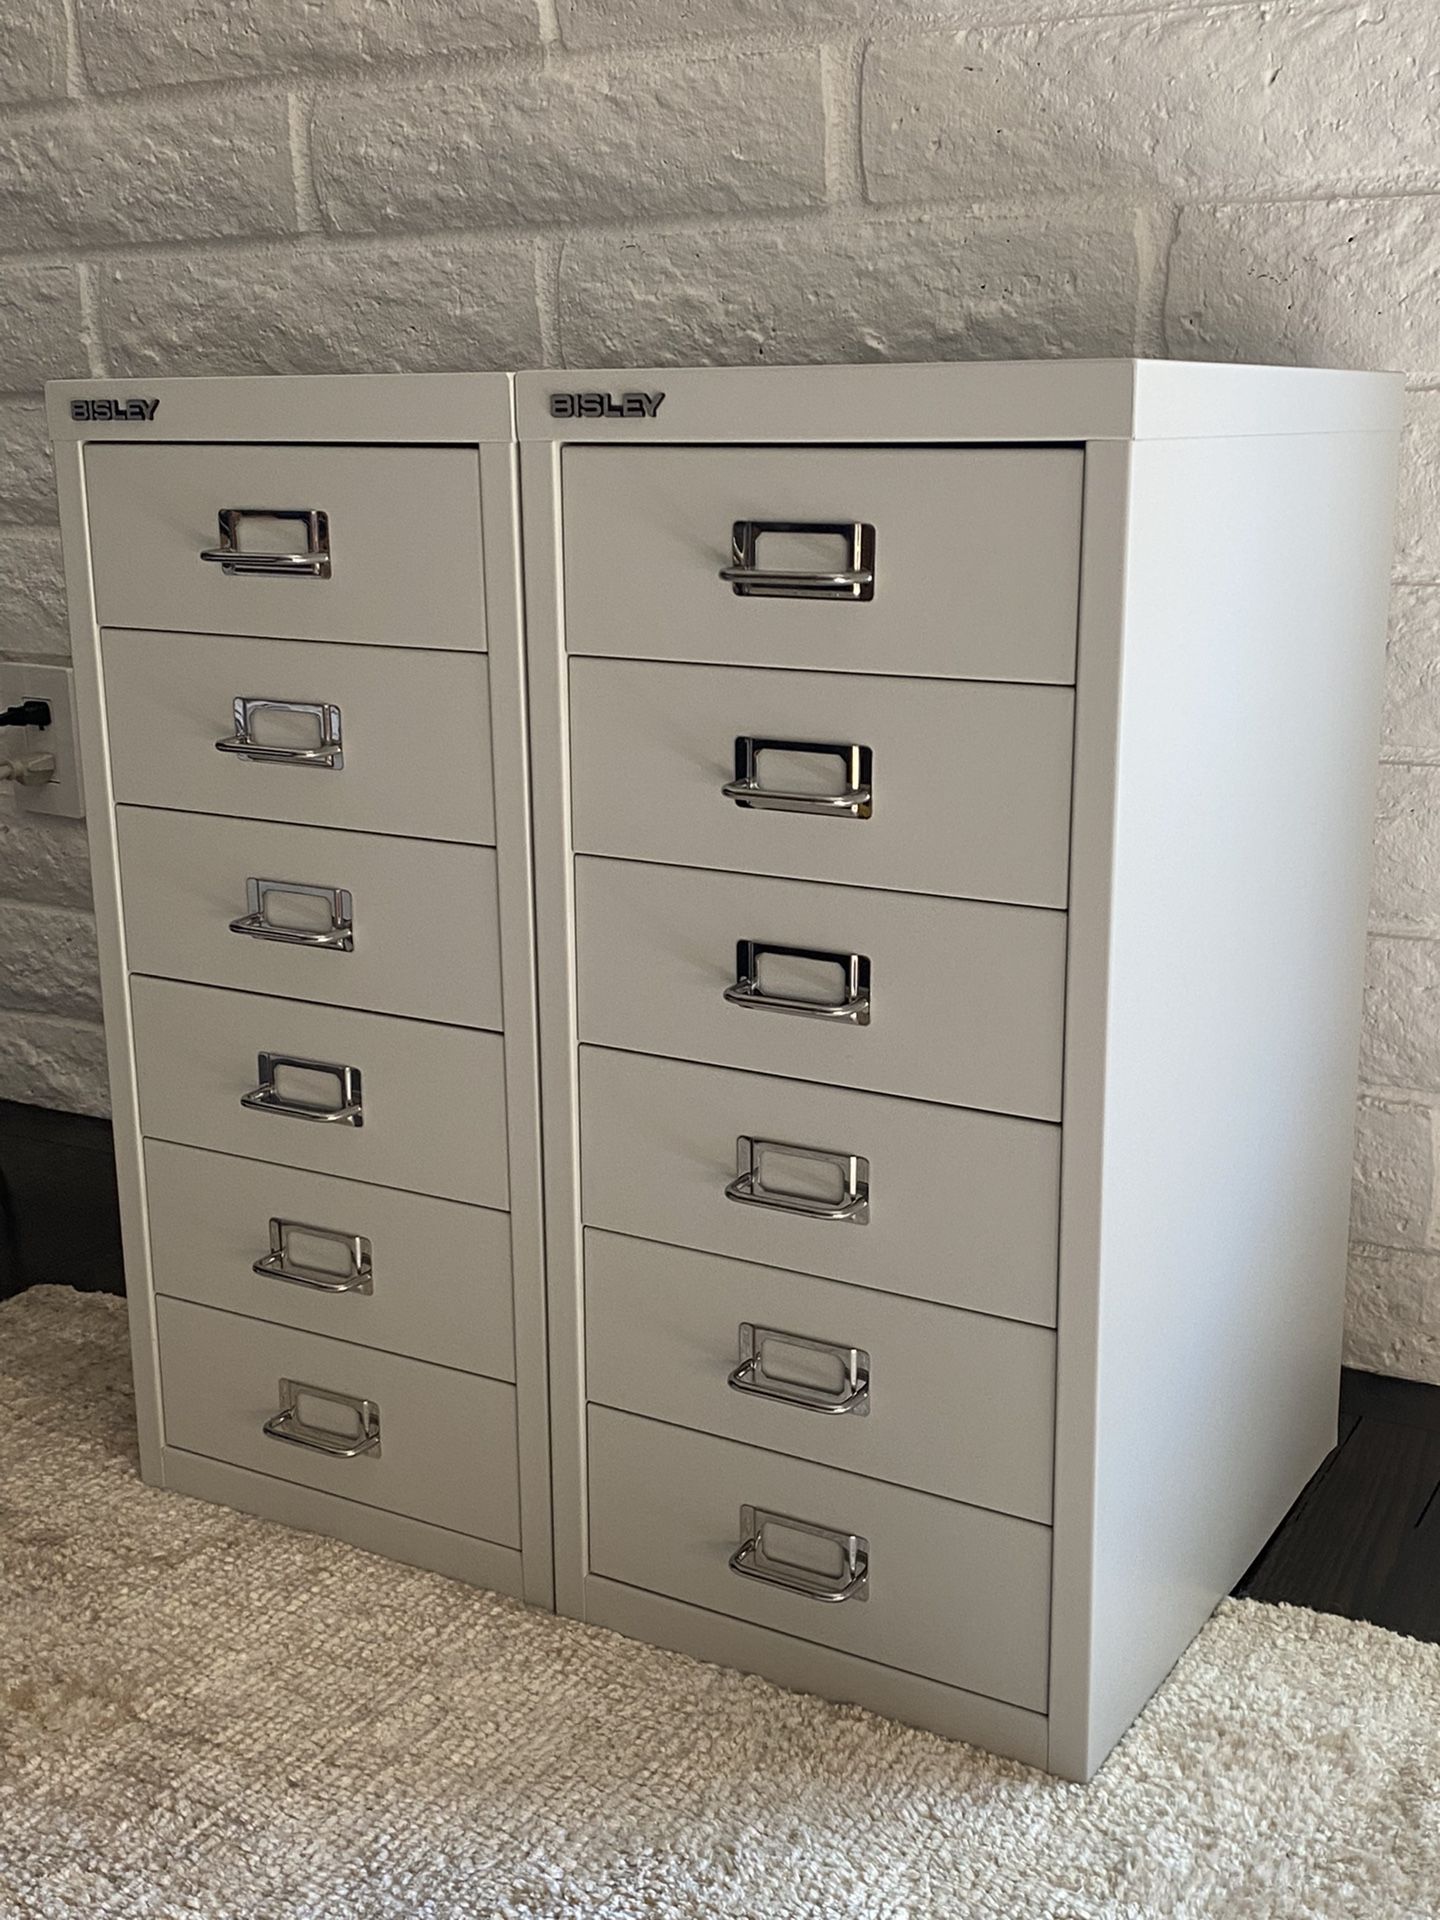 BRAND-NEW Designer Cabinets For Home Office